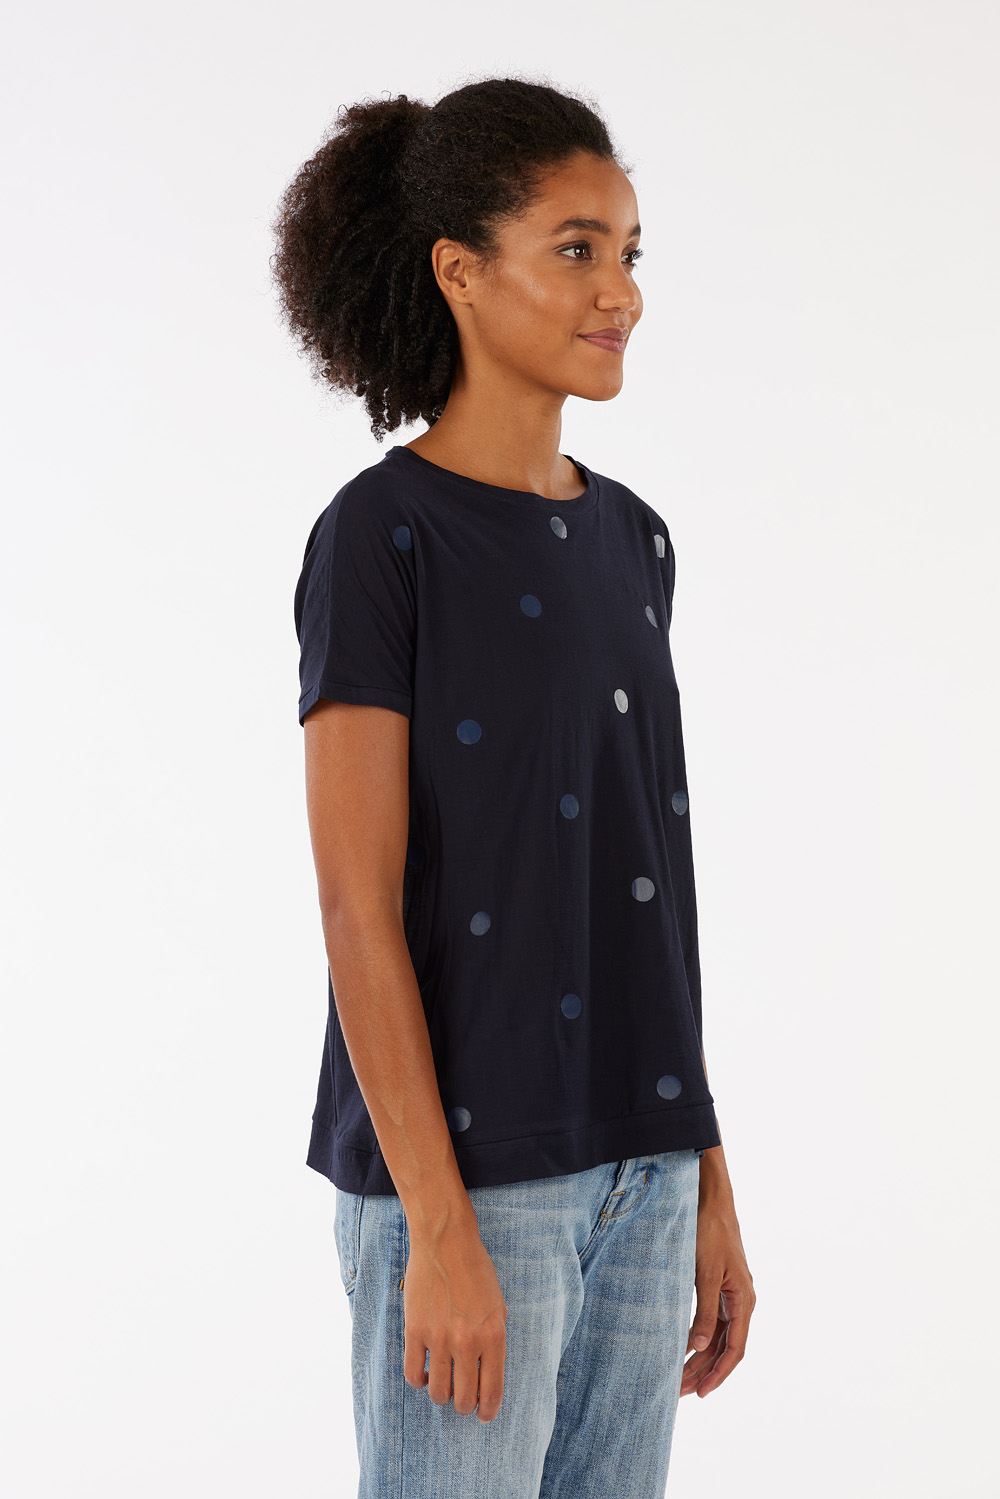 Boat neck T-shirt in 100% superfine cotton with tone-on-tone polka dots on the front